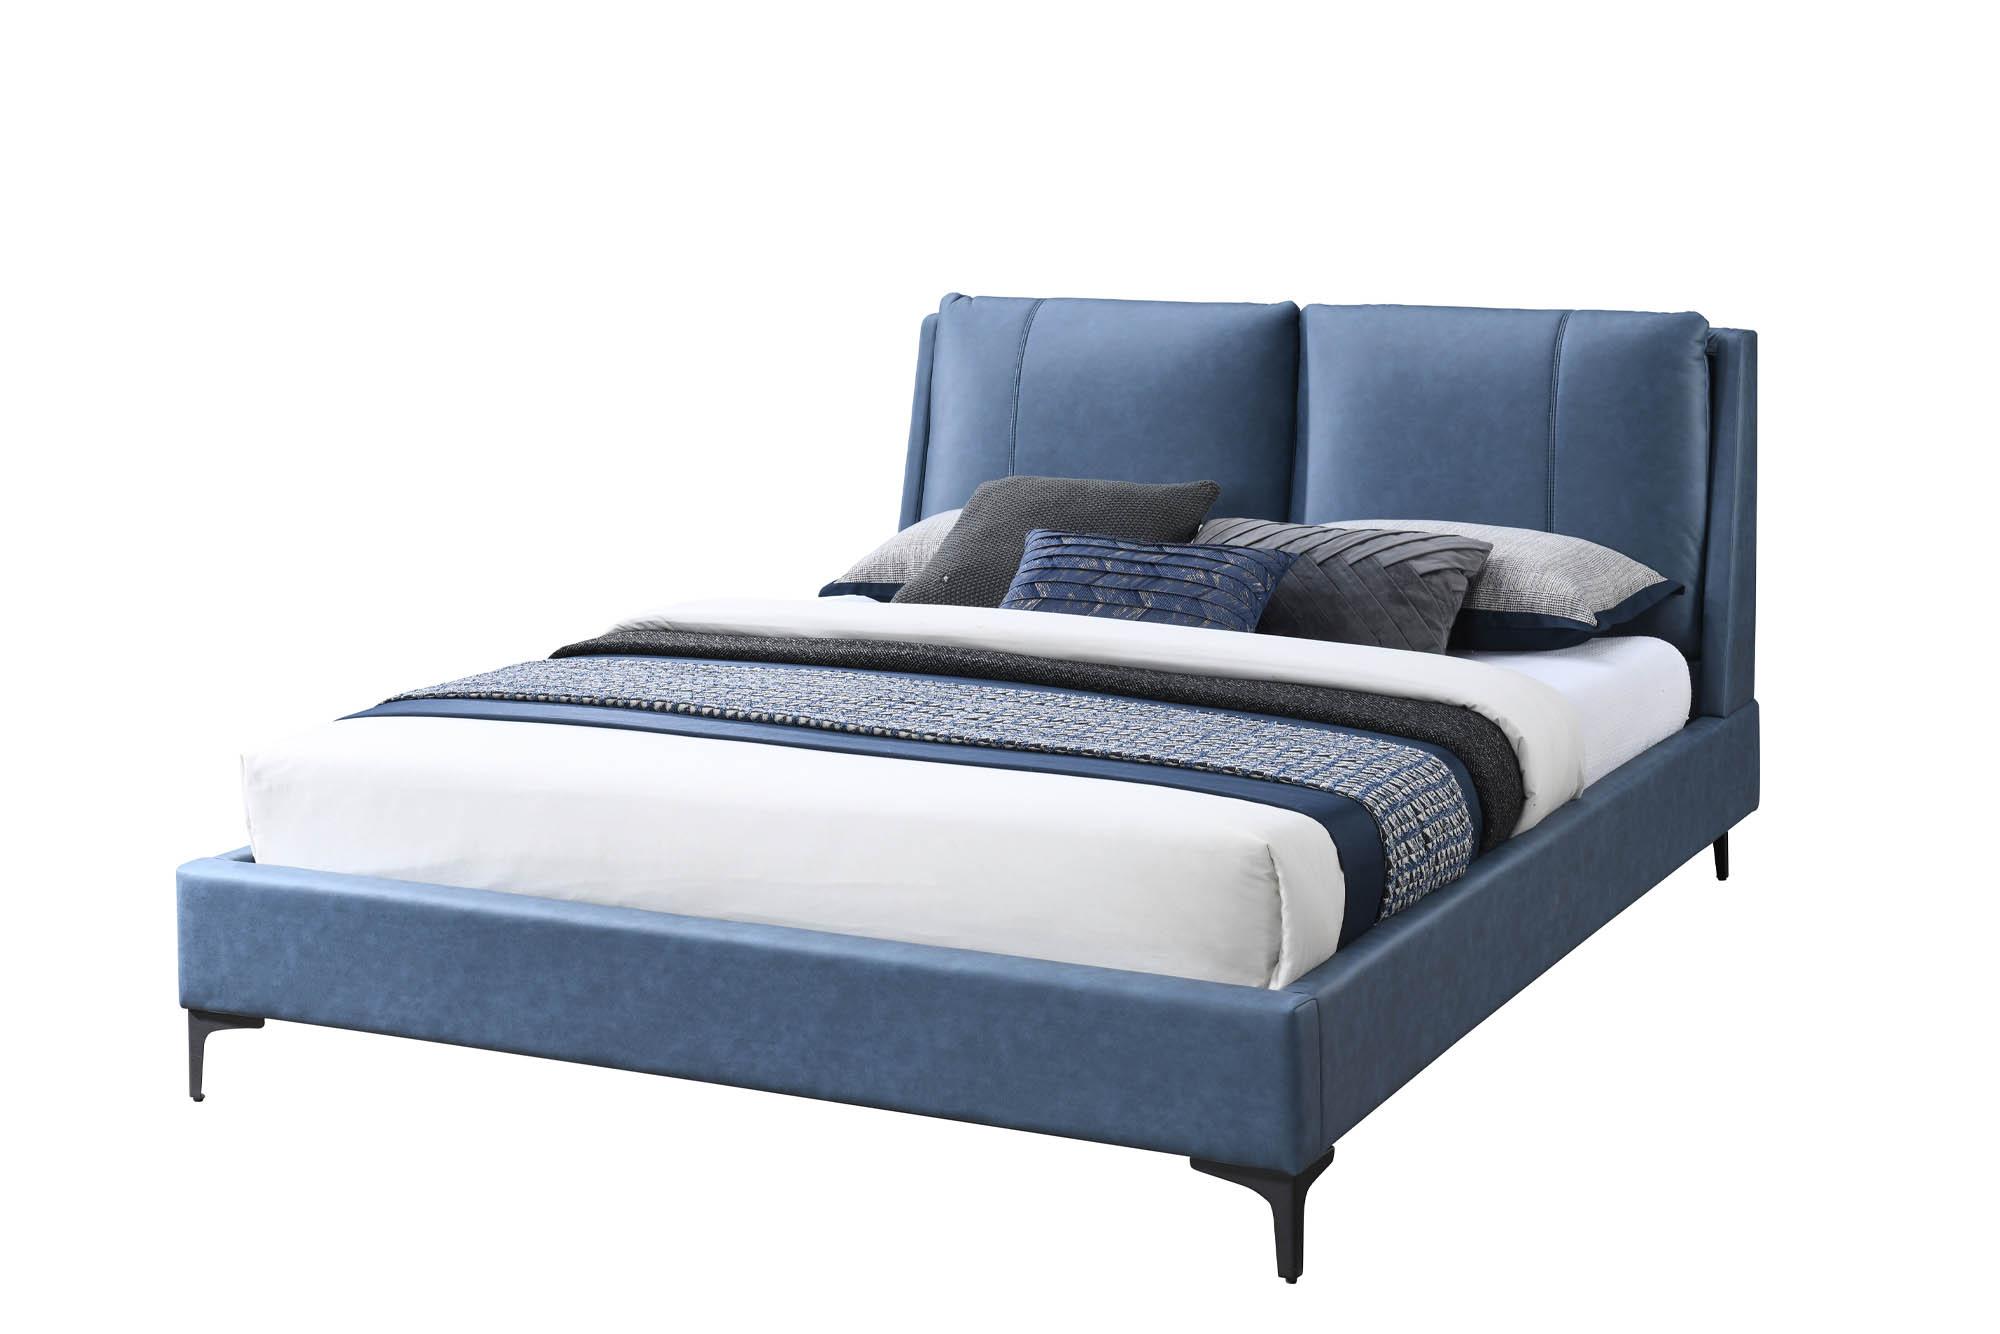 Modern, Transitional Panel Bed BRYANT 1142-110 1142-110 in Blue Polyester